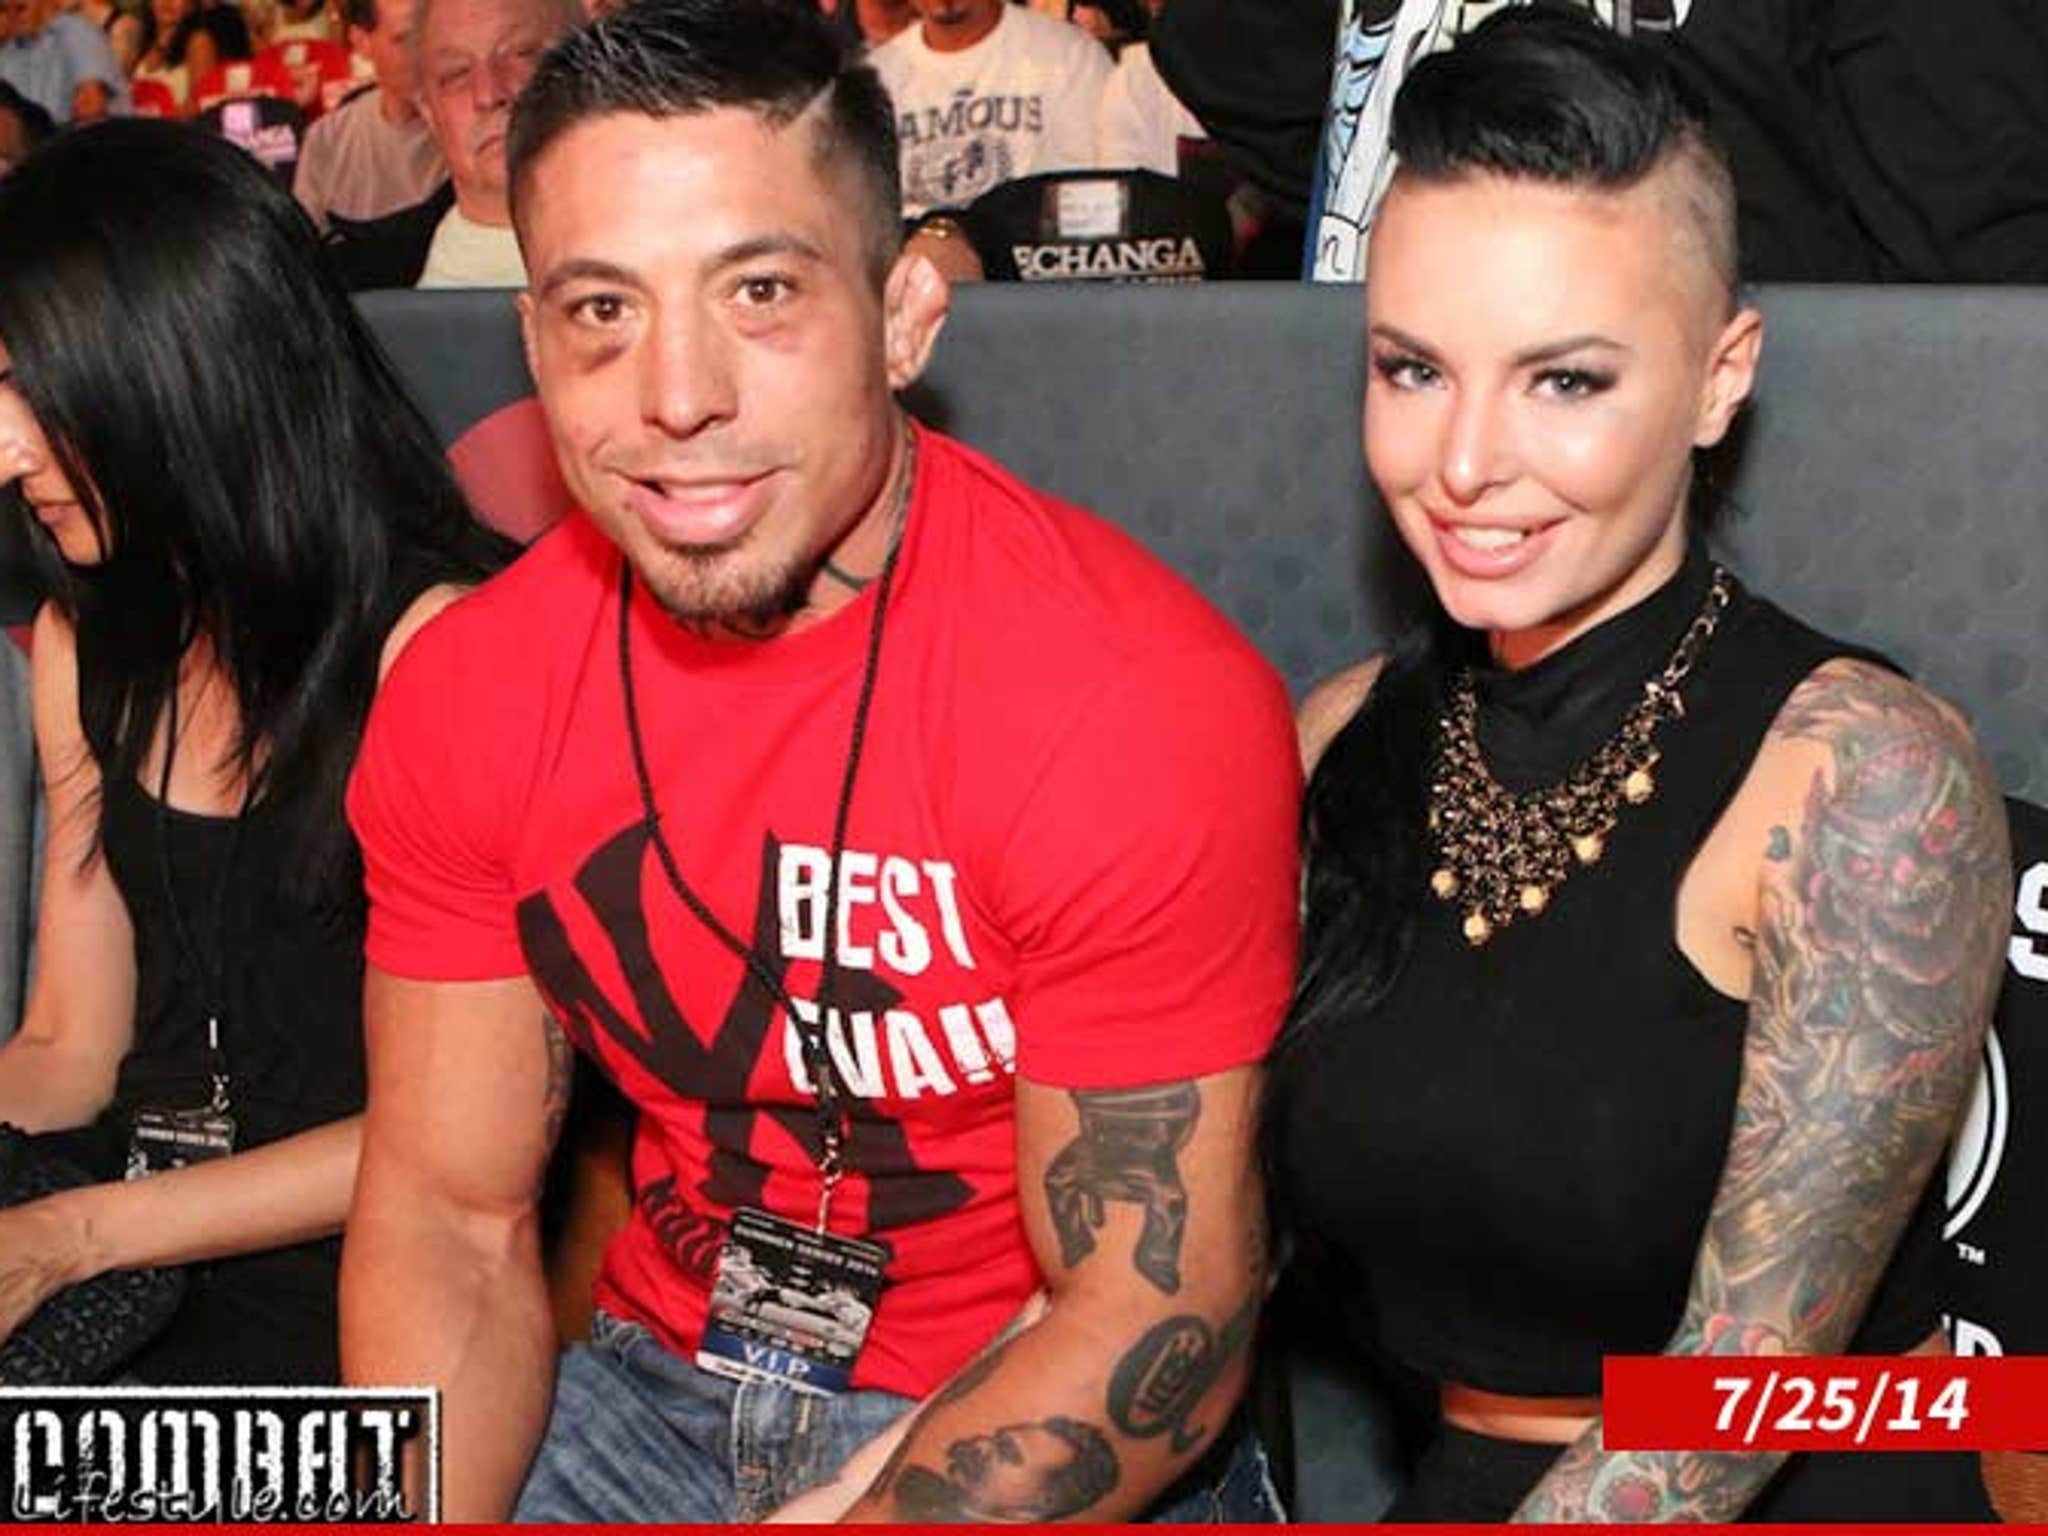 byungkook park recommends christy mack in public pic